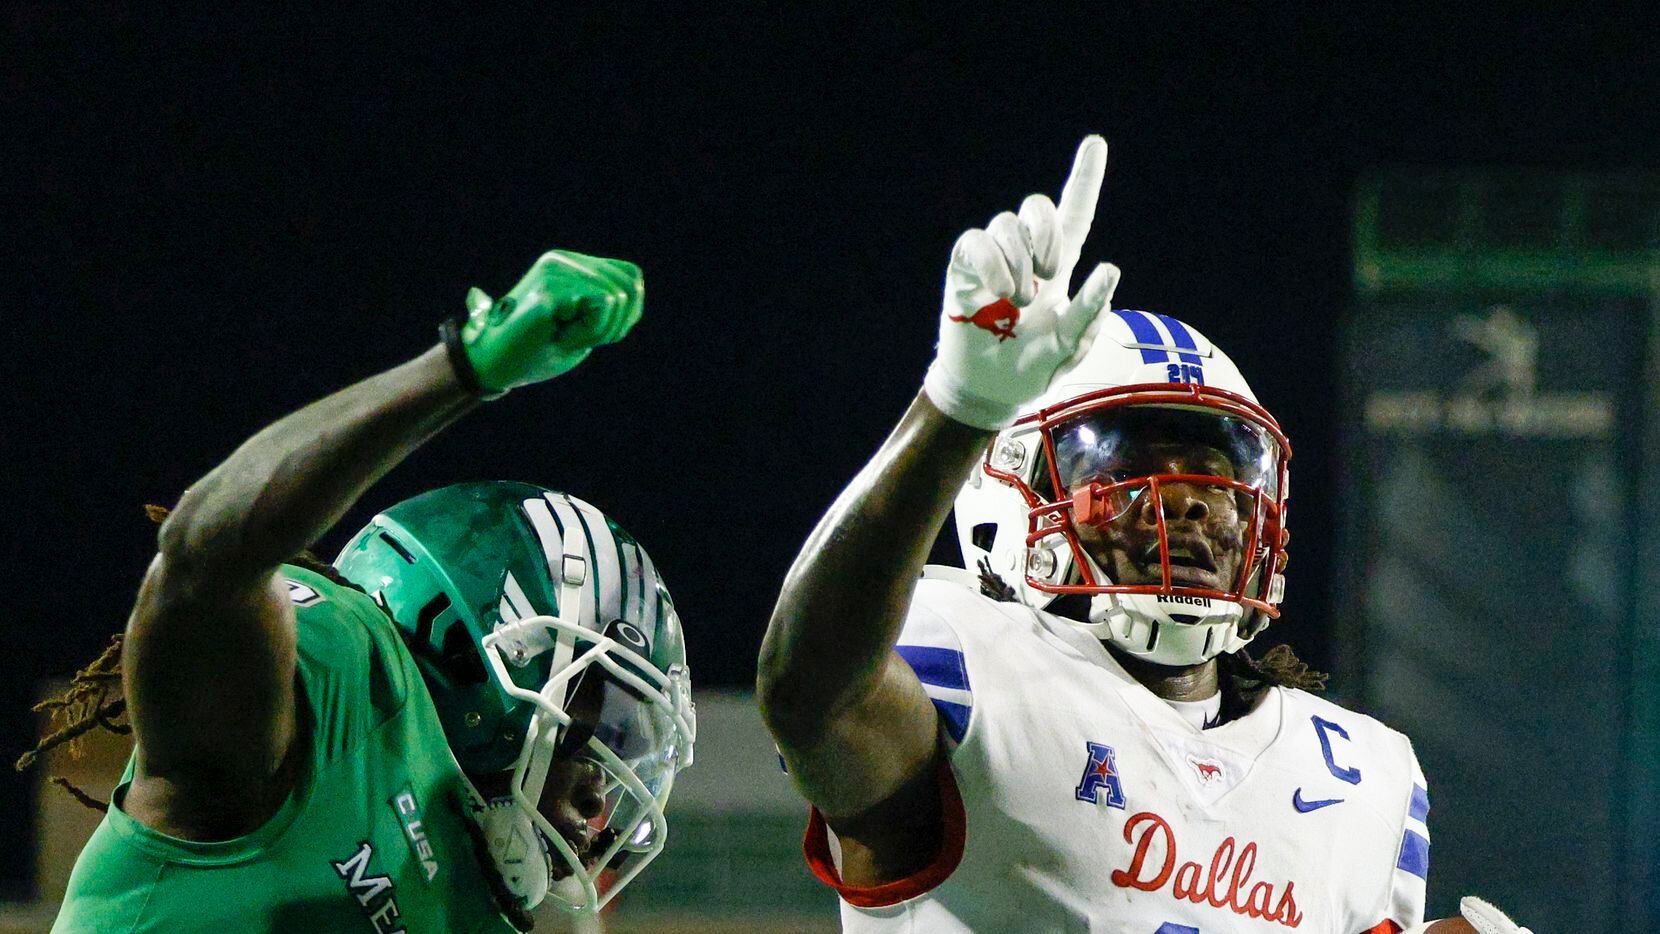 SMU wide receiver Rashee Rice (11) celebrates a touchdown catch in the end zone ahead of UNT...